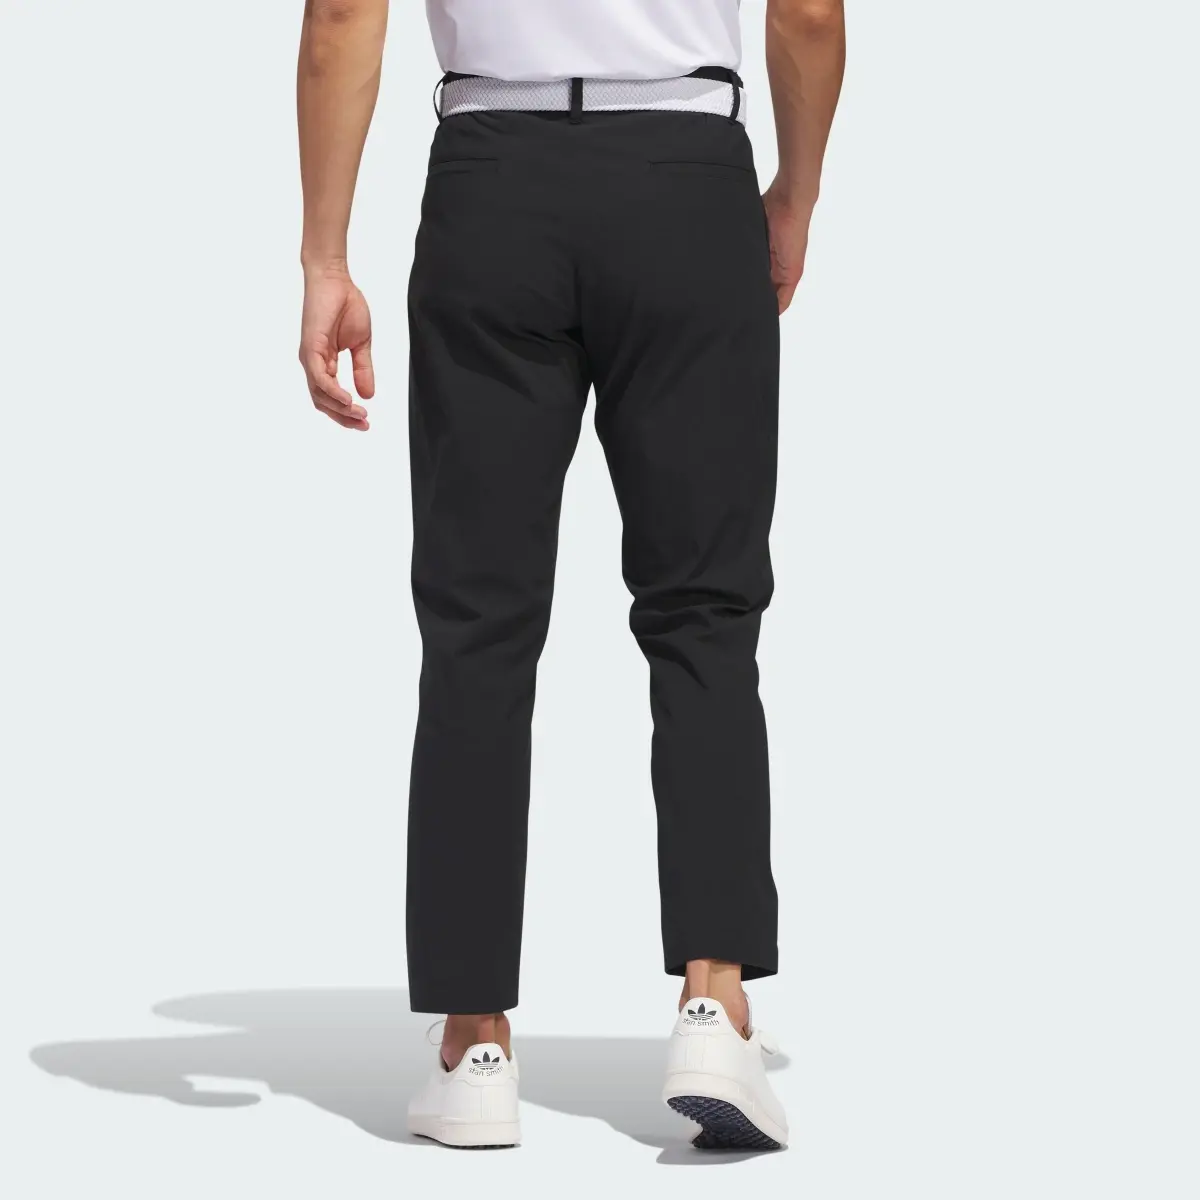 Adidas Ultimate365 Chino Trousers. 2